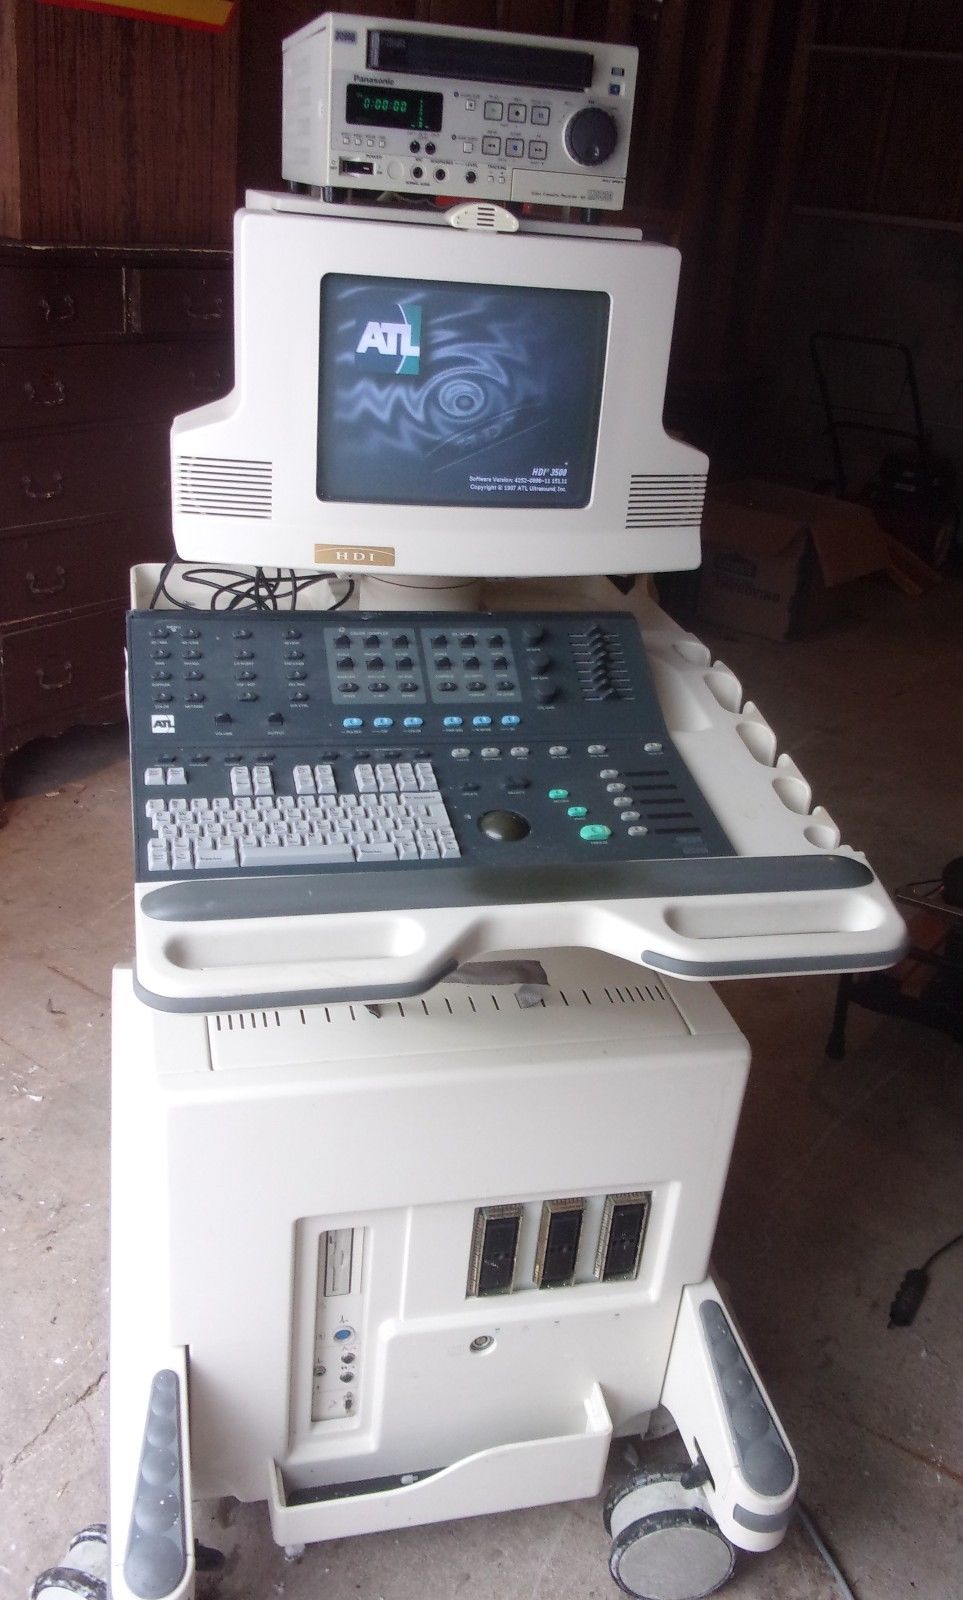 HDI-3500 ATL Diagnostic Ultrasound System with 2 Probes C5-2 & C8-4 DIAGNOSTIC ULTRASOUND MACHINES FOR SALE